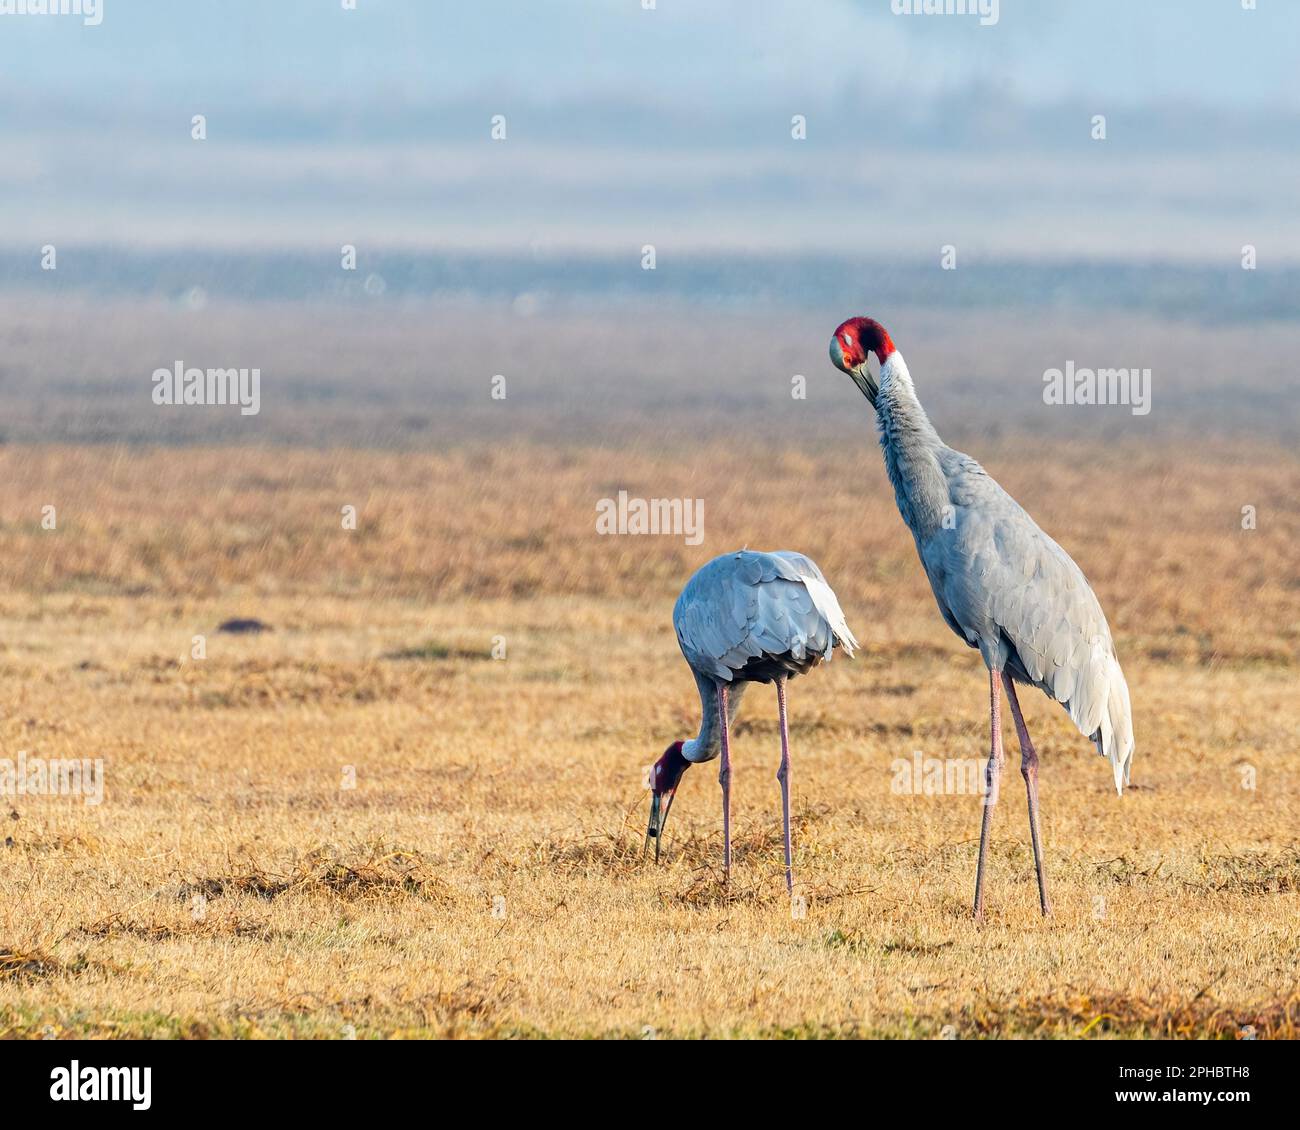 A Pair of Sarus Crane in a field Stock Photo